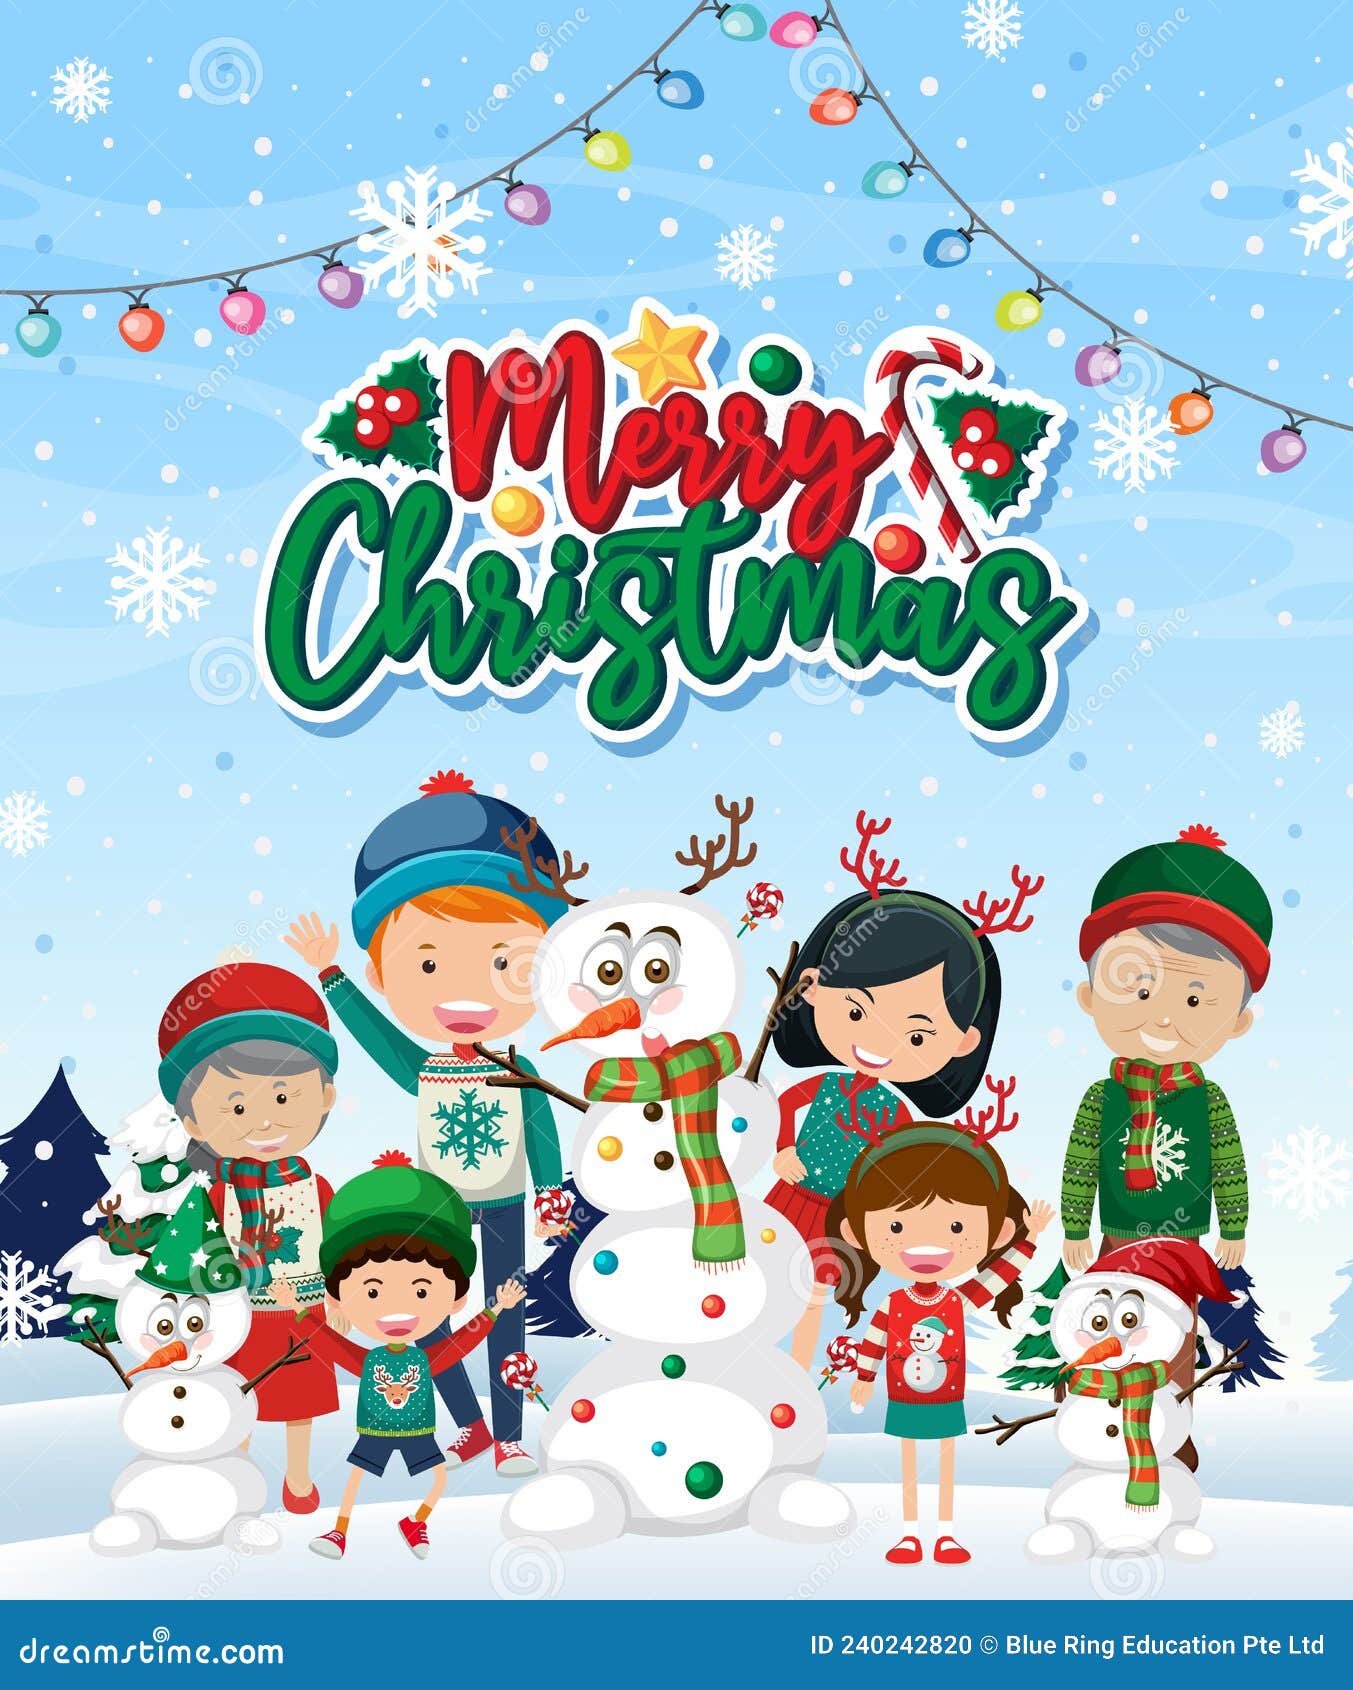 Merry Christmas Poster with Children and Snowman Stock Vector ...